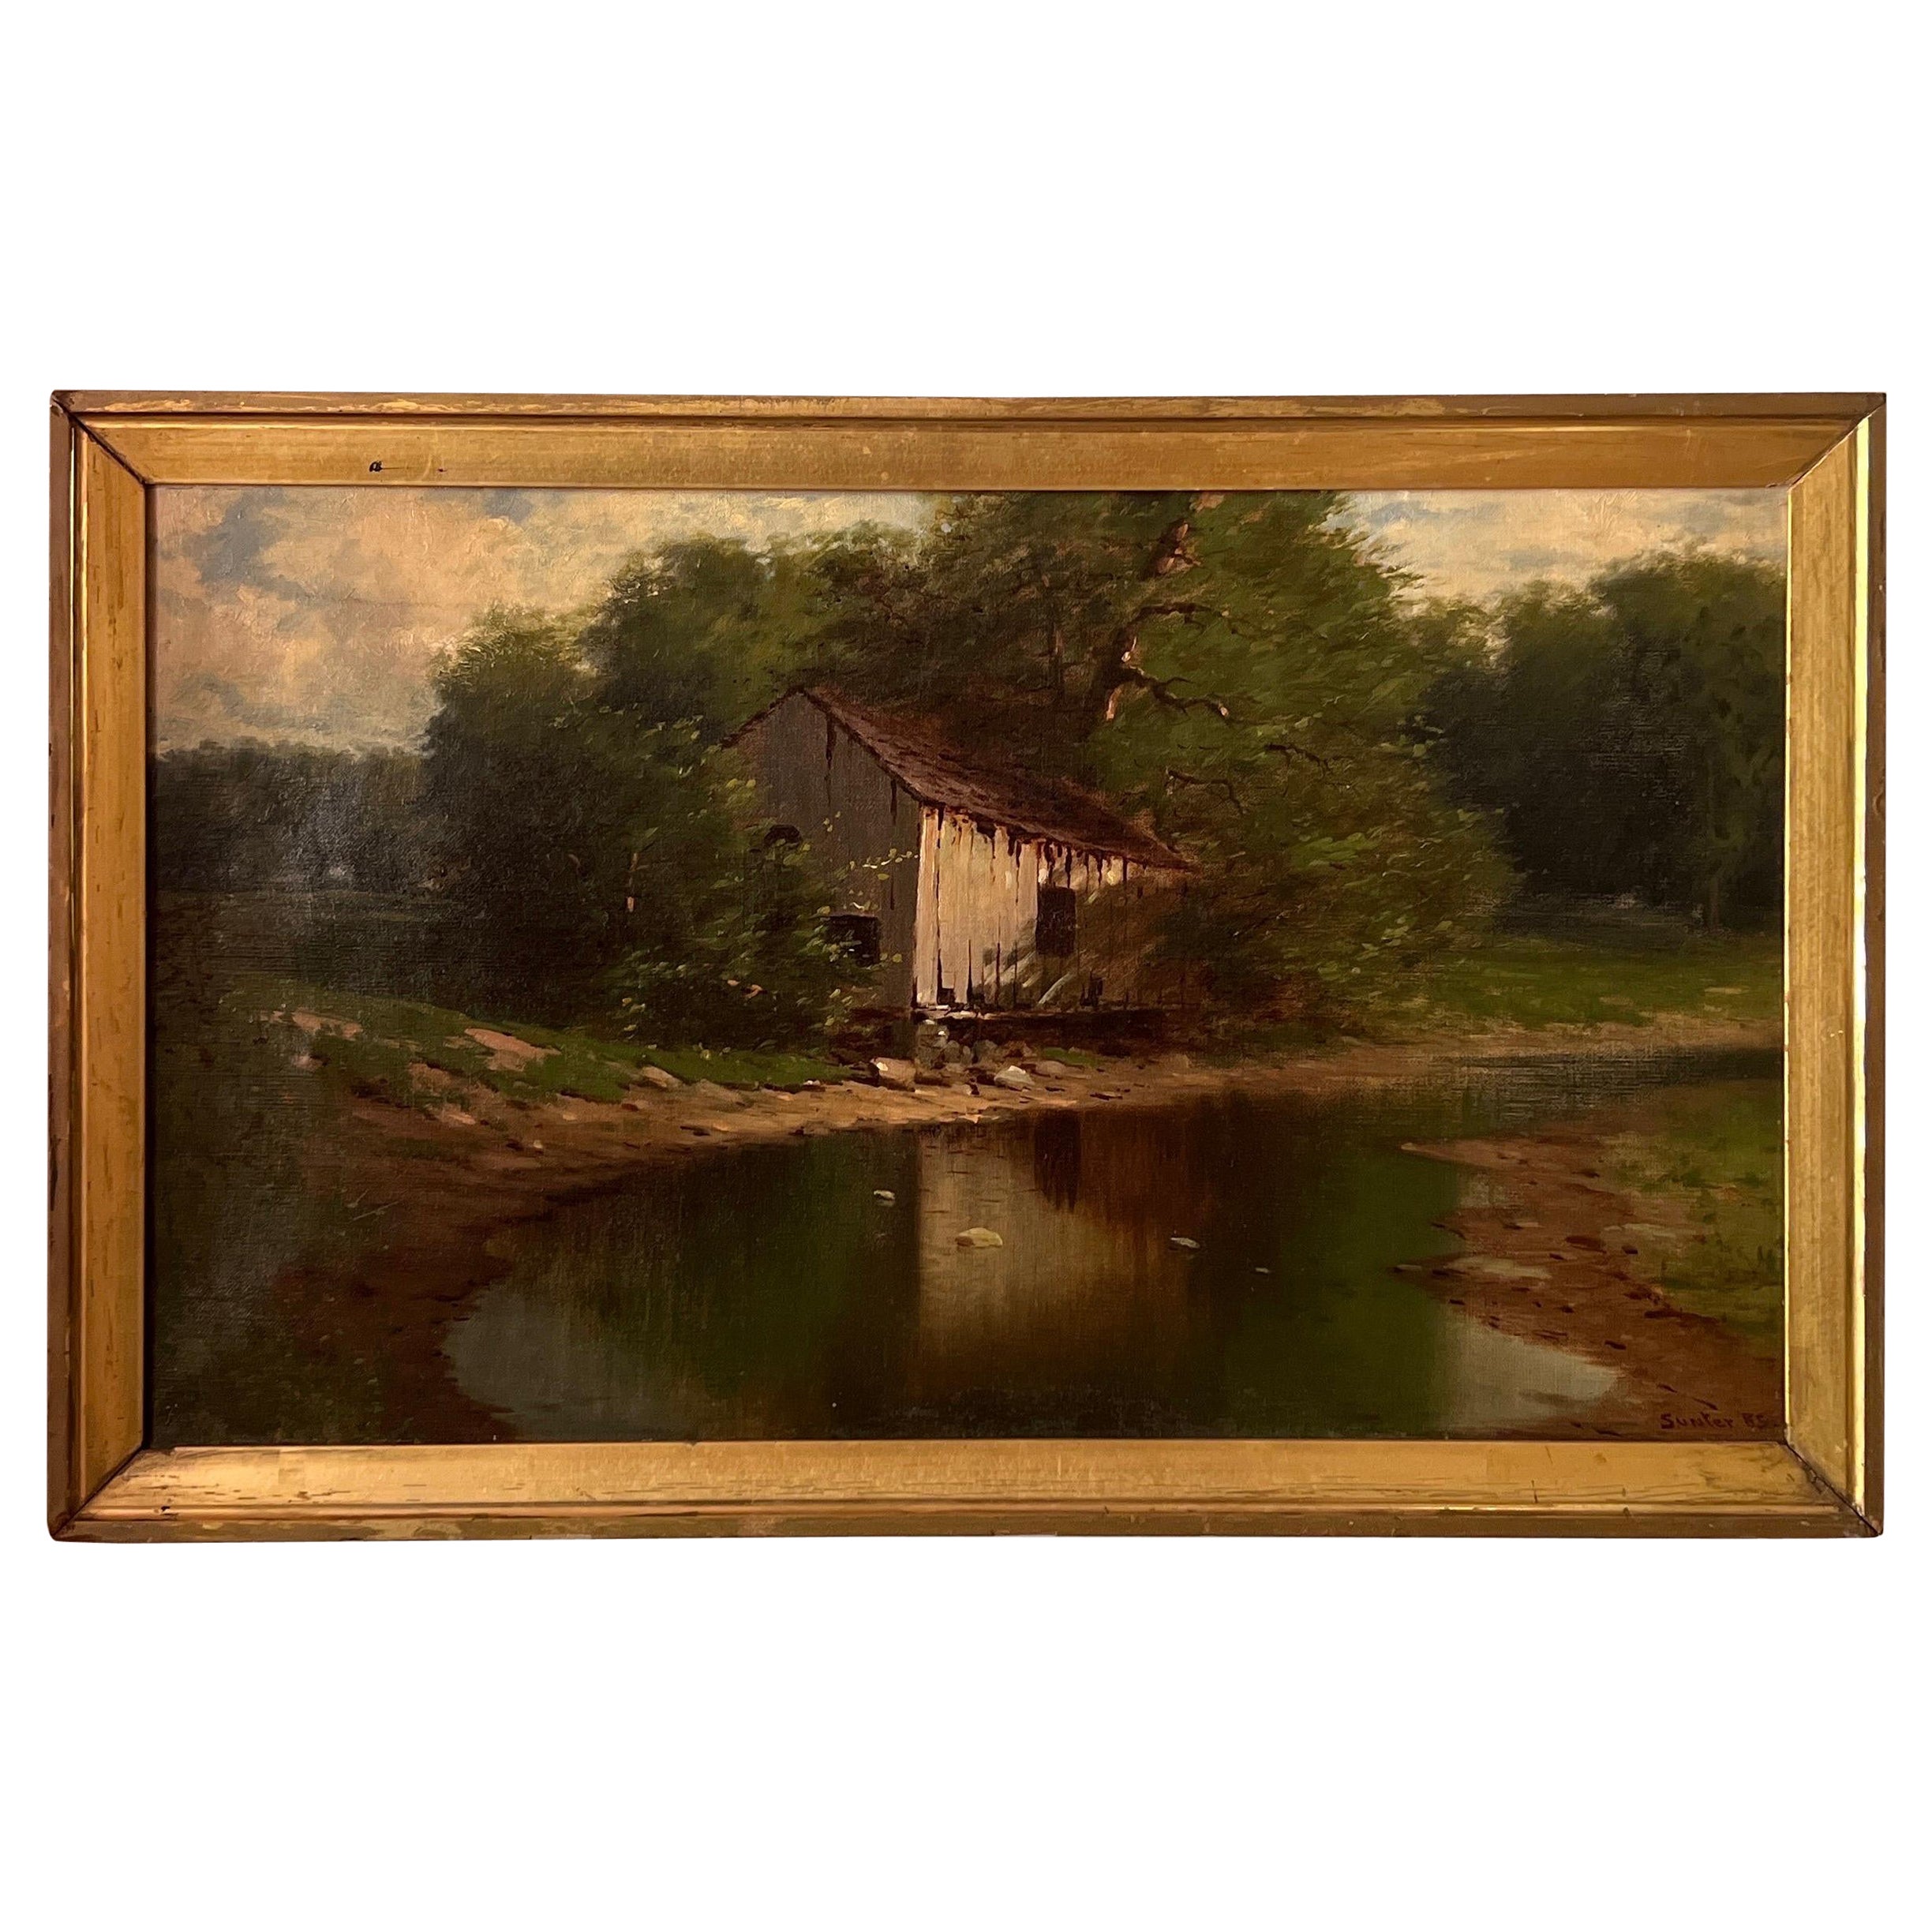 Harry Sunter (American, 1850-1900) "Old Mill By The River In Massachusetts" 